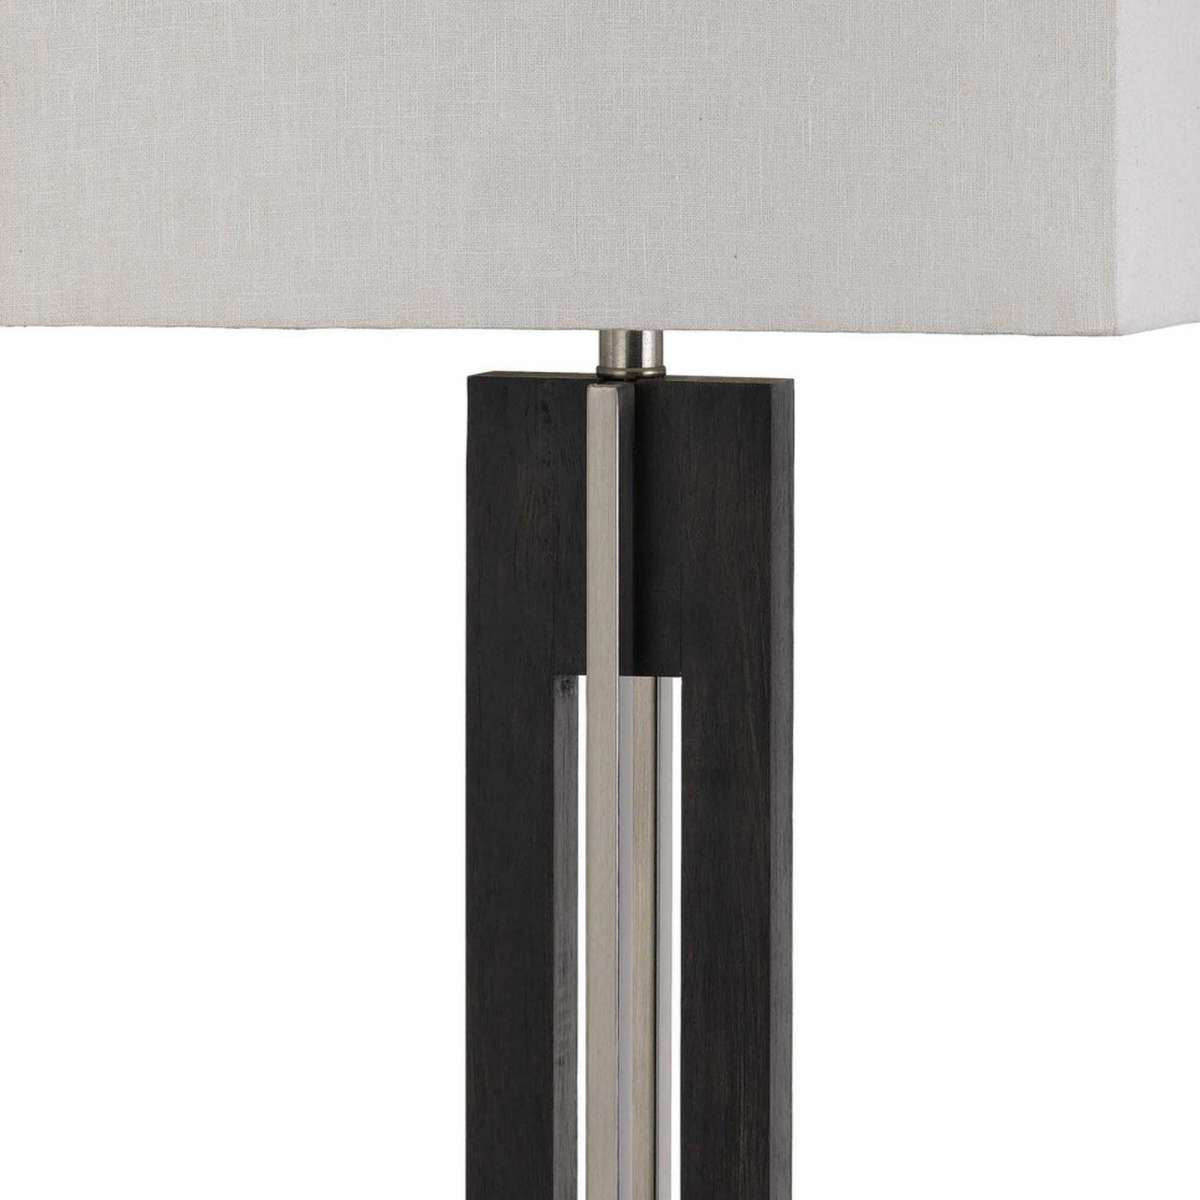 33" Metal Table Lamp With Sturdy Base, Black And White By Benzara